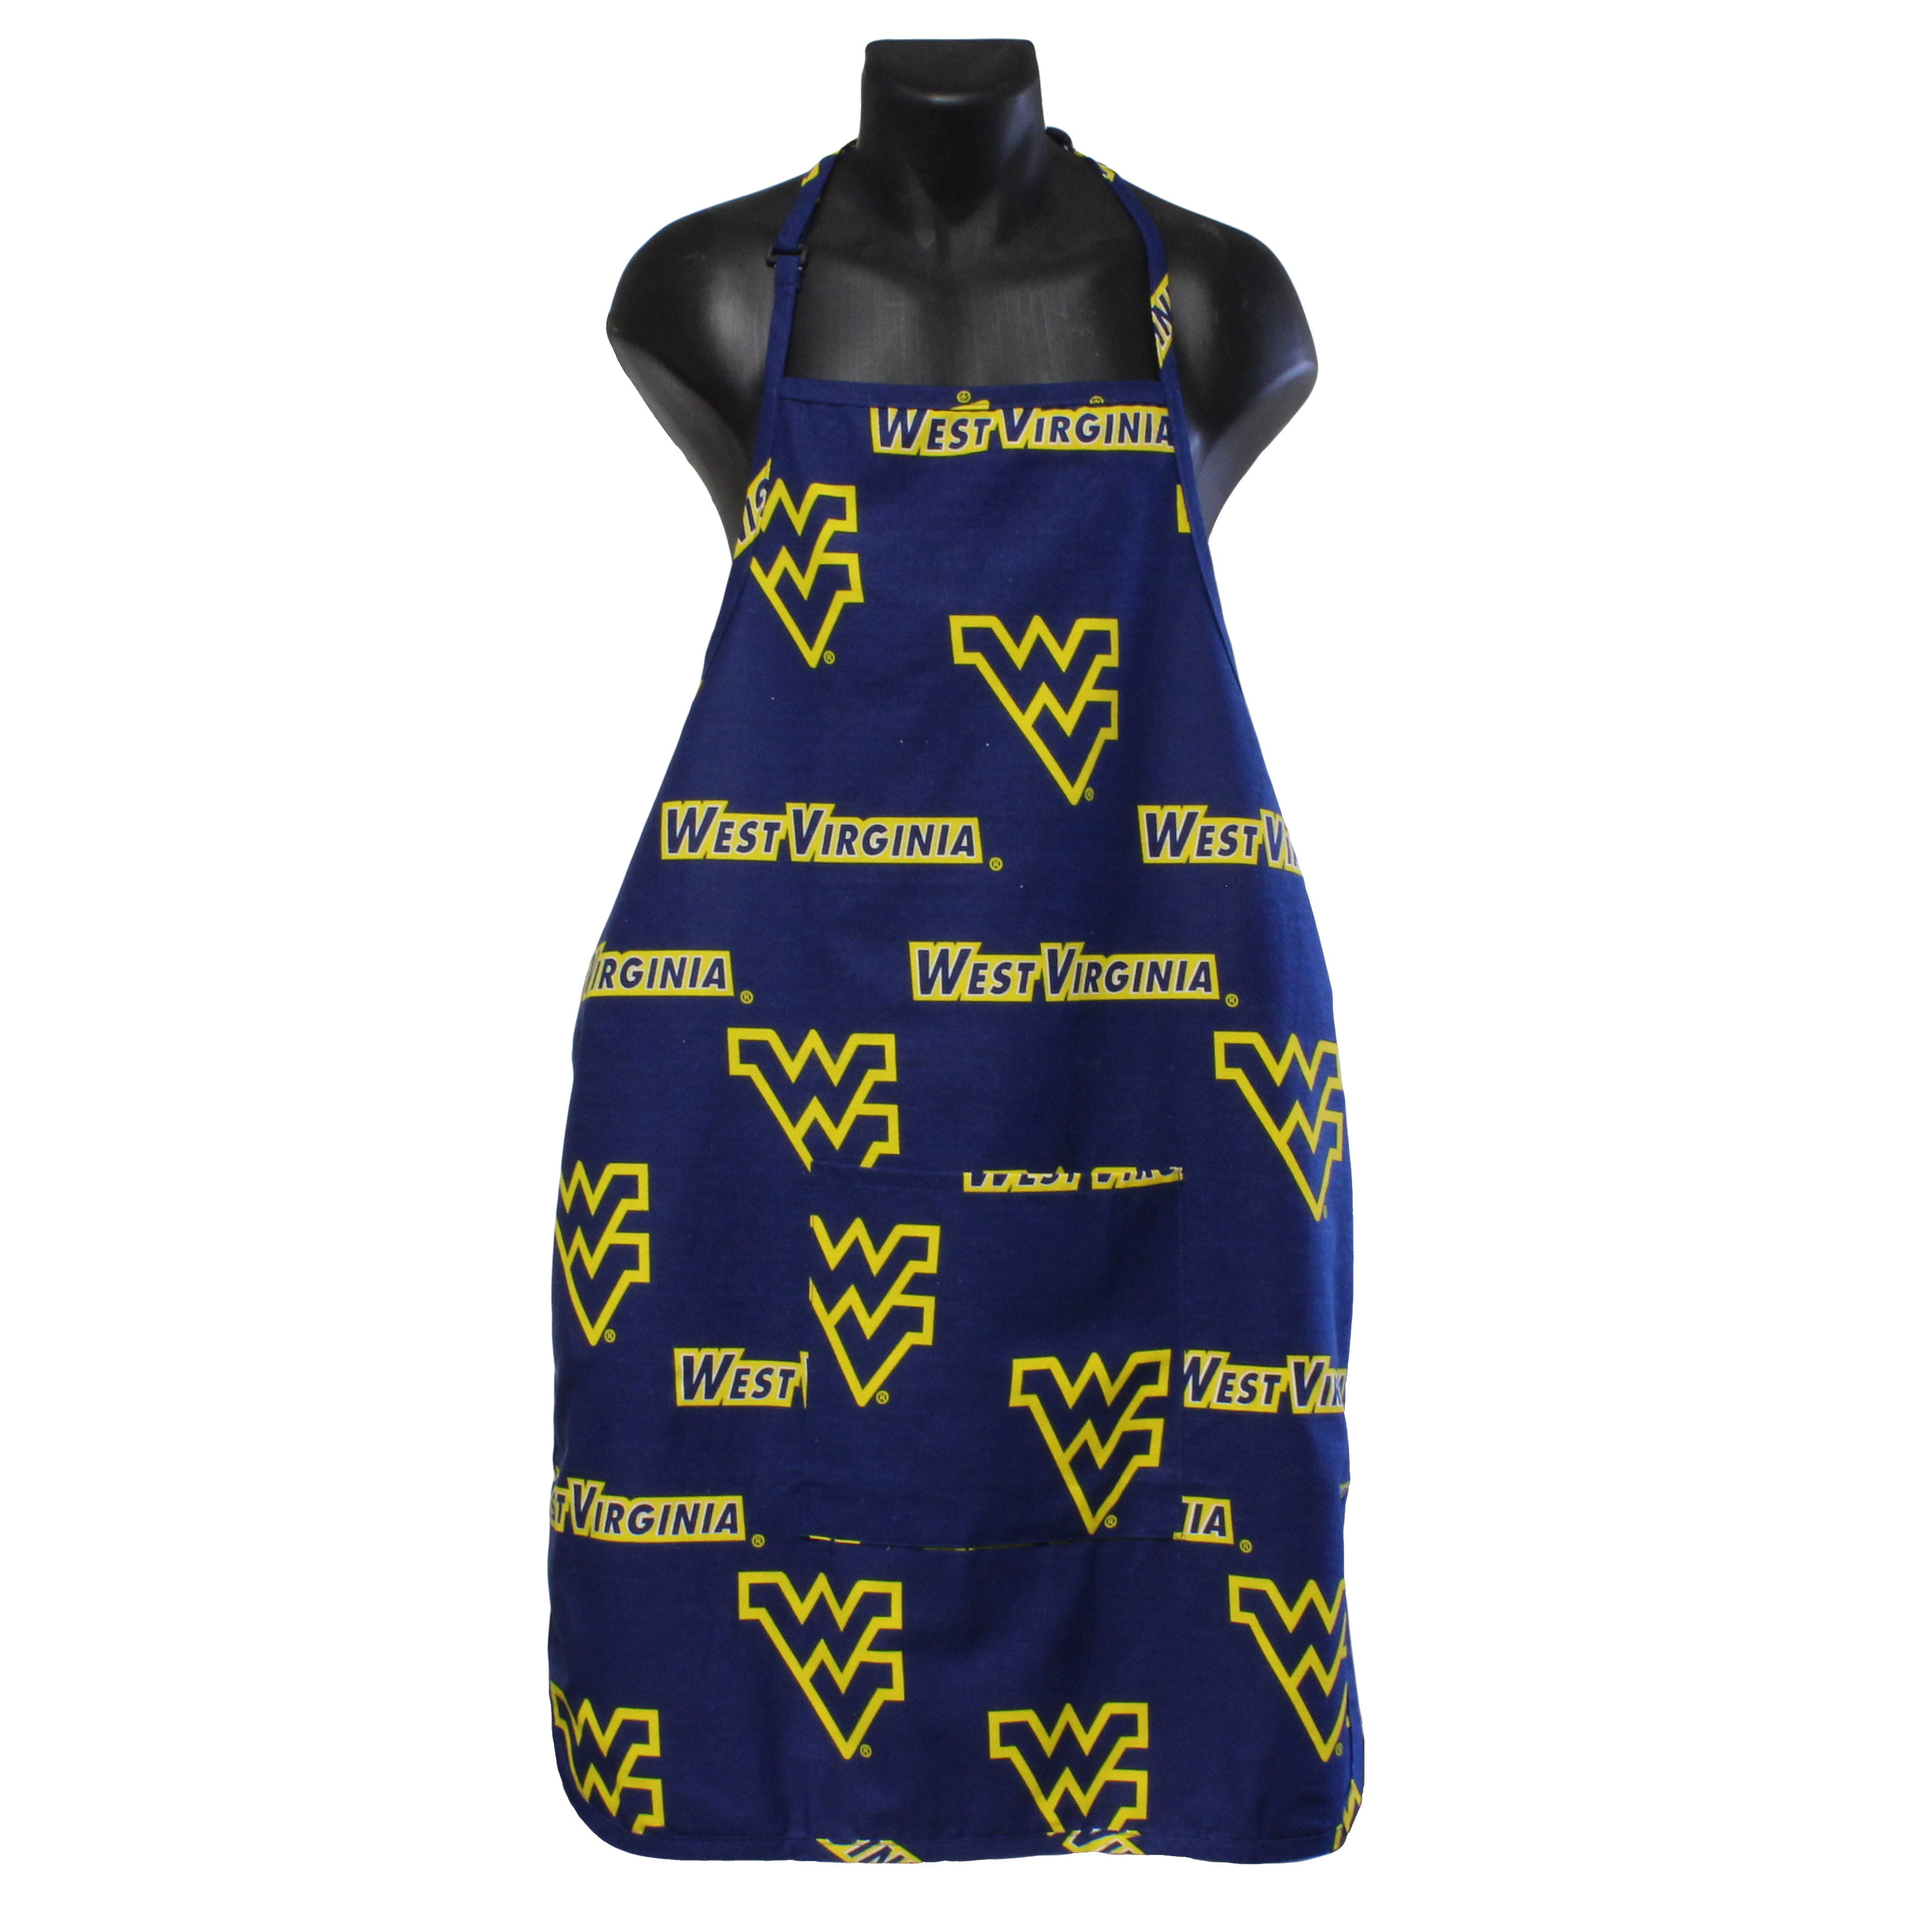 Fully Adjustable Neck College Covers West Virginia Mountaineers Tailgating or Grilling Apron with 9 Pocket Team Colors One Size